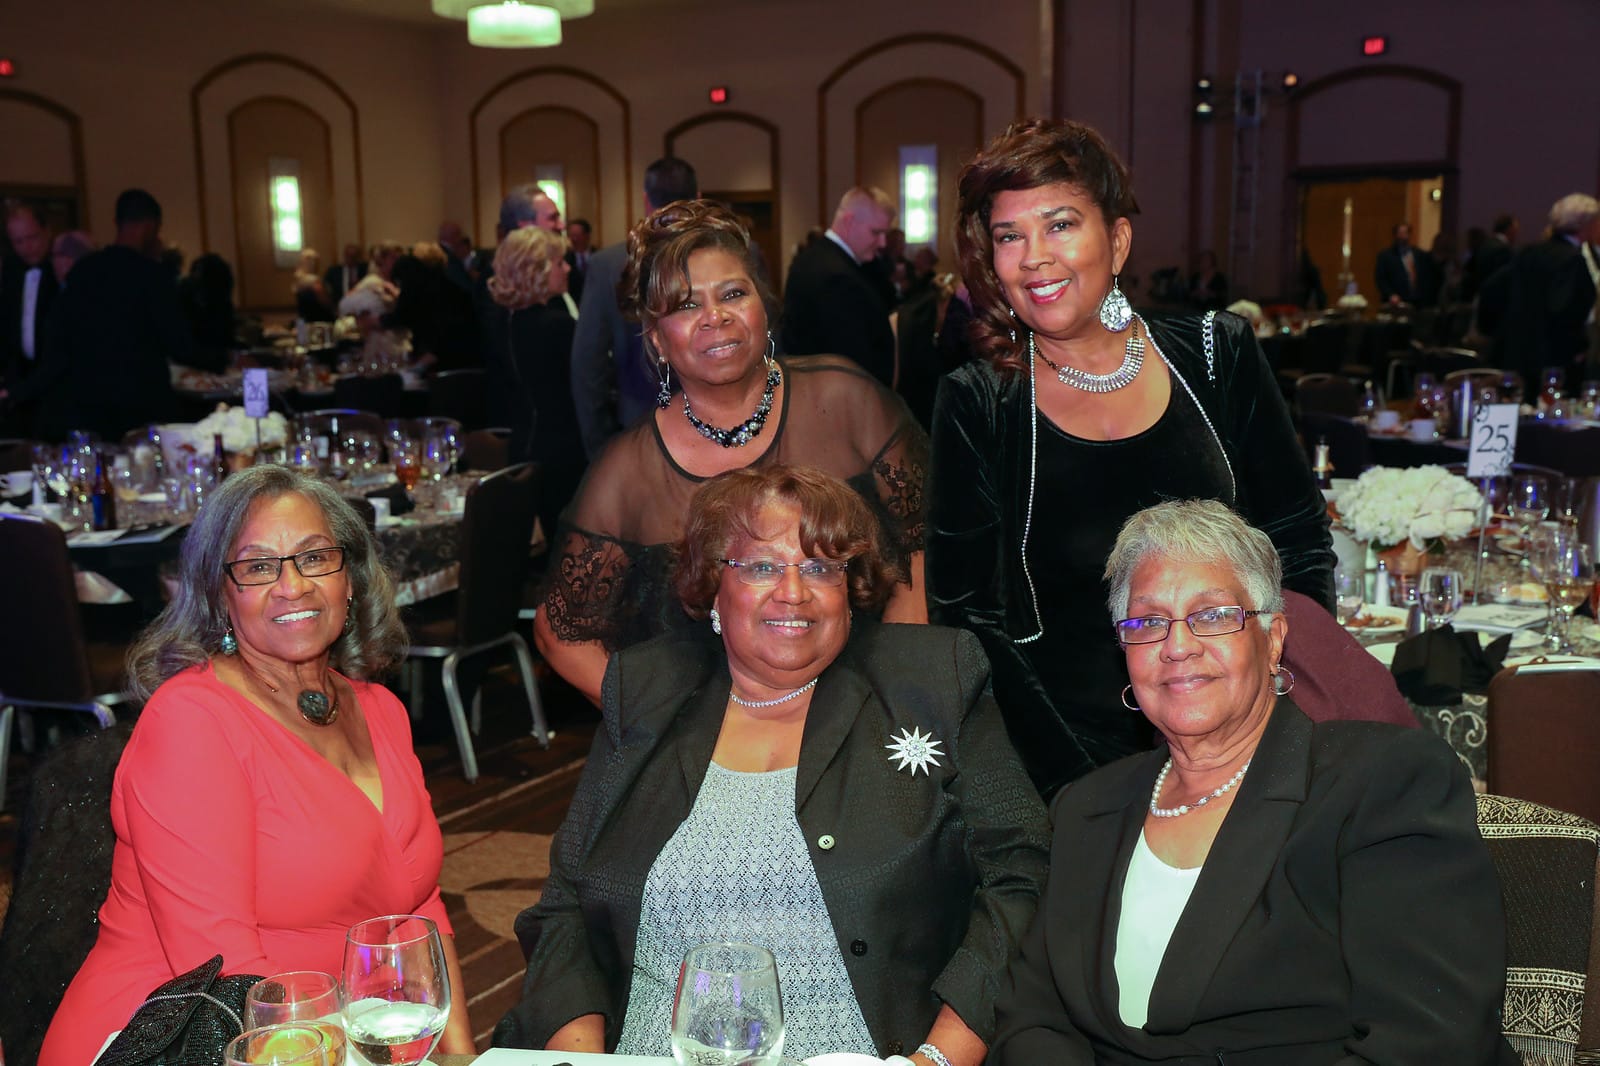 St. Andrew's Charitable Foundation Ageless Gala